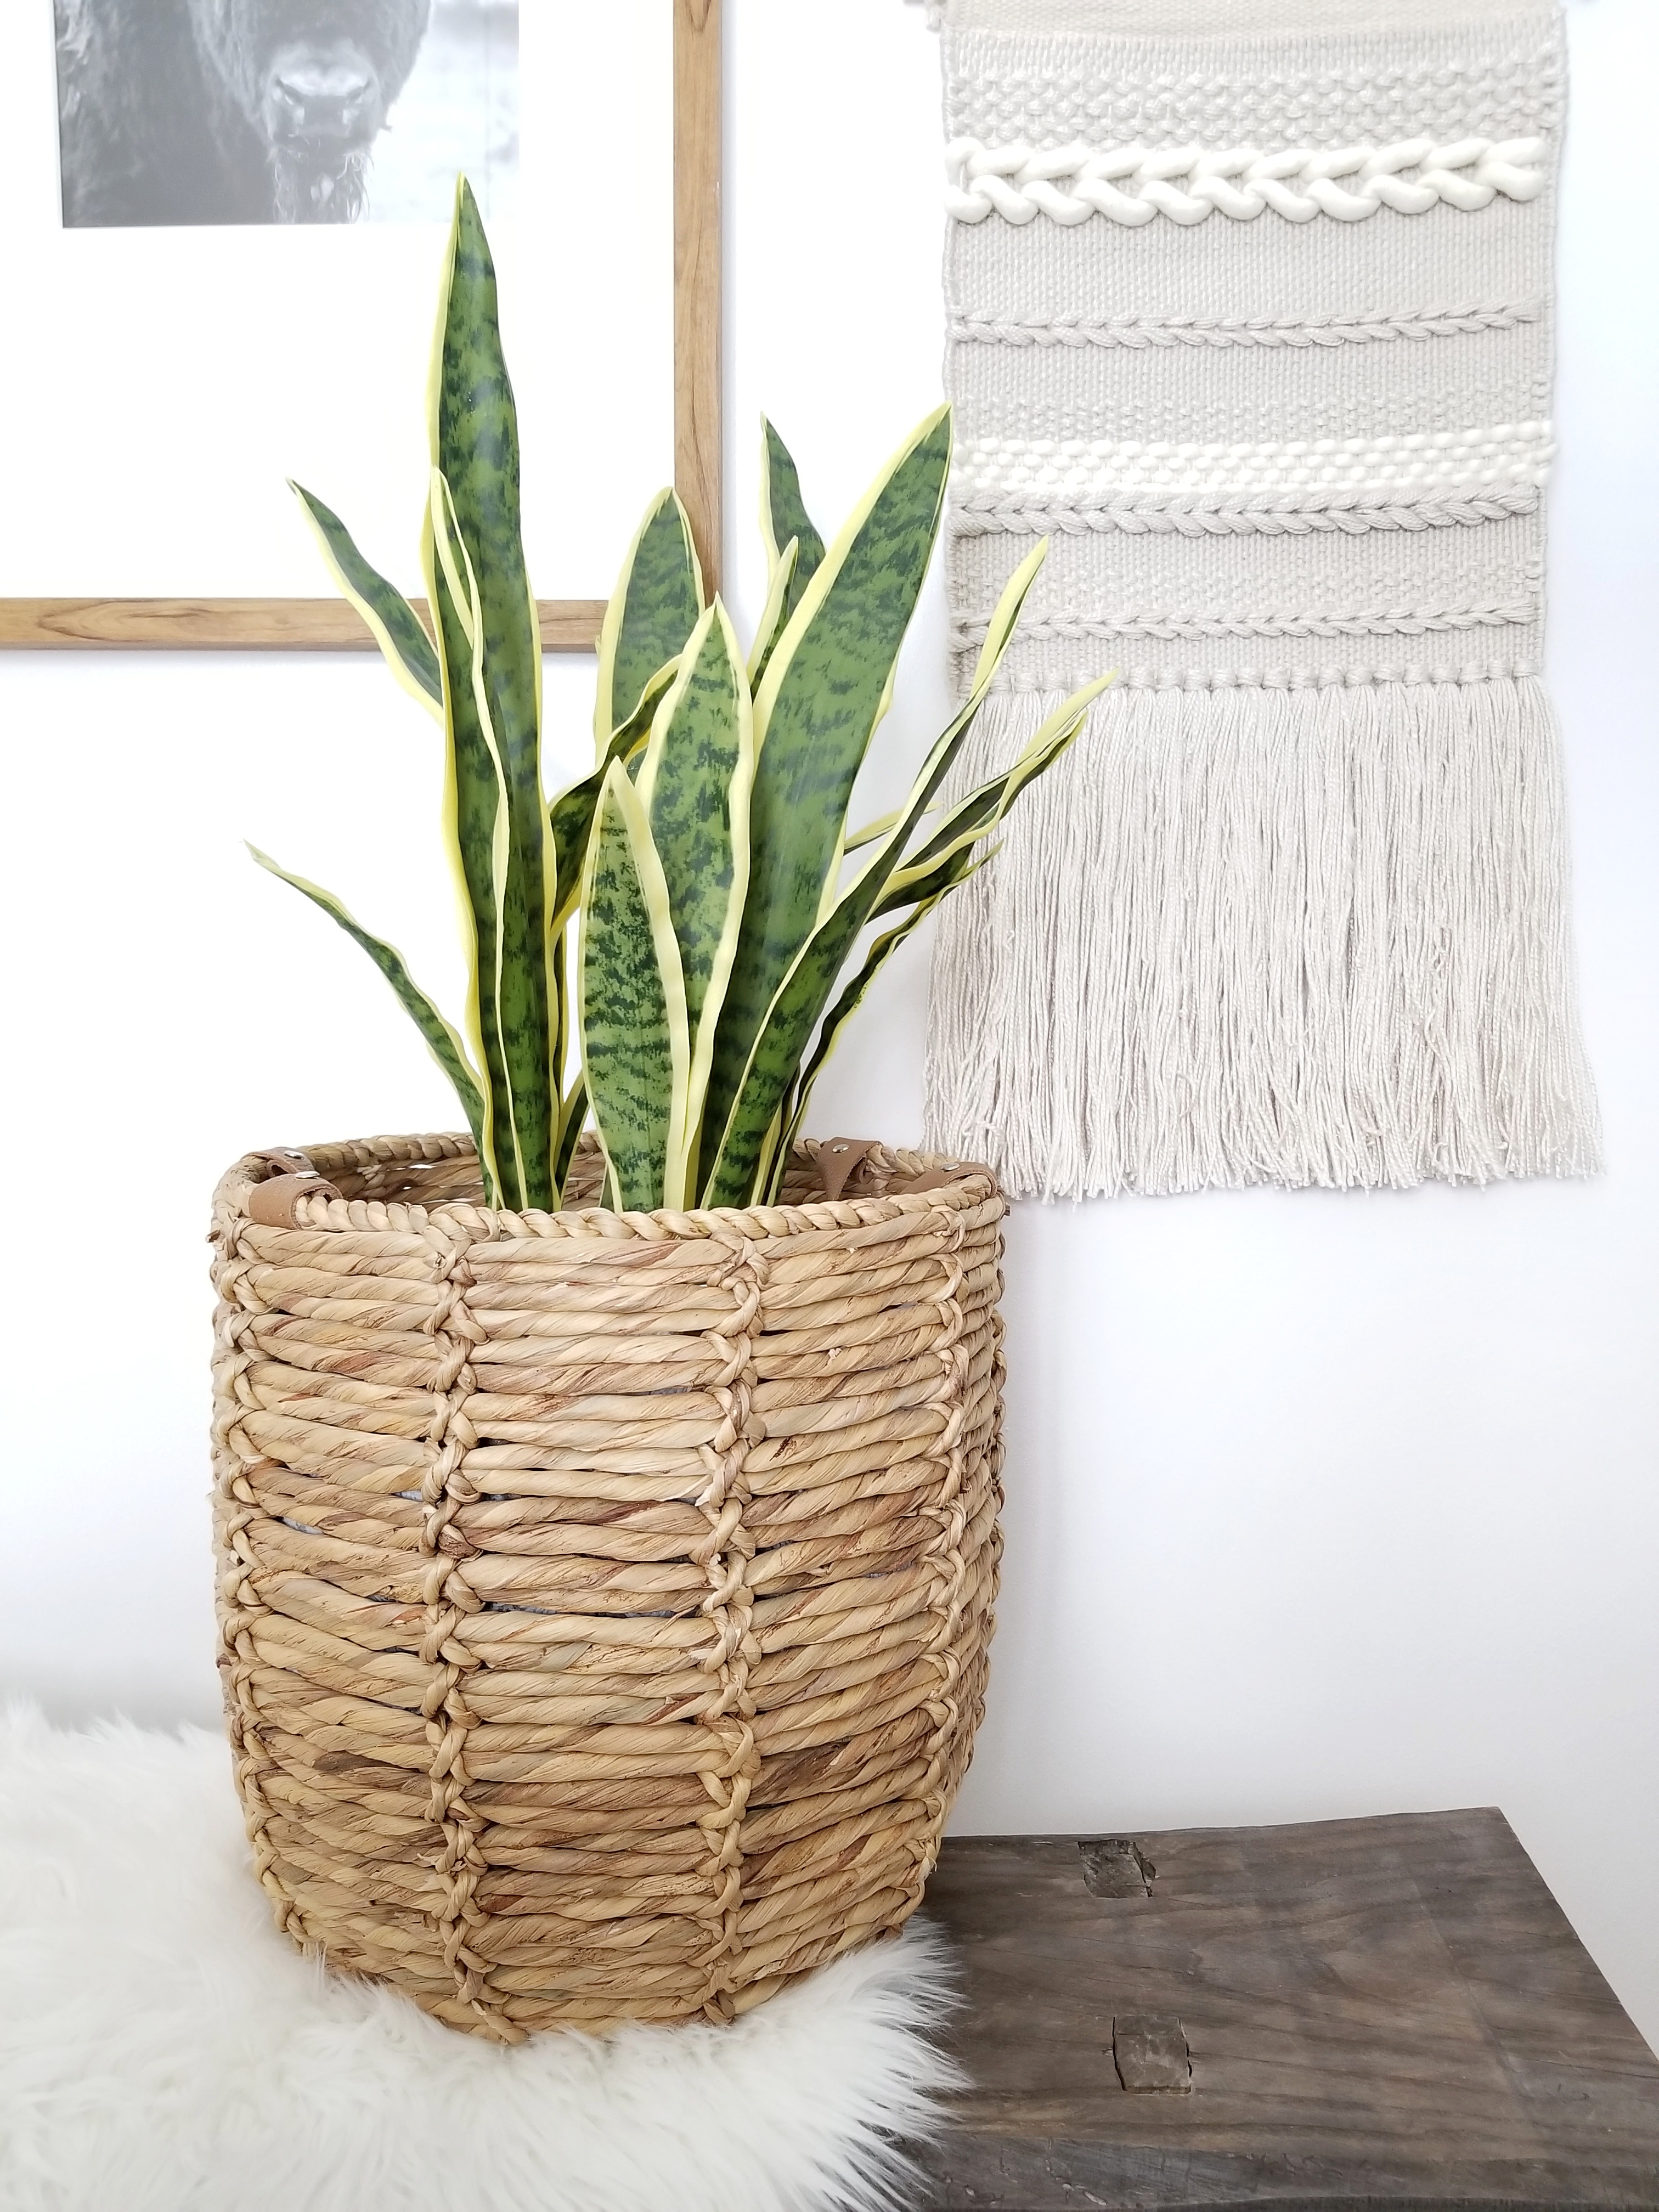 Add texture to your home with baskets.